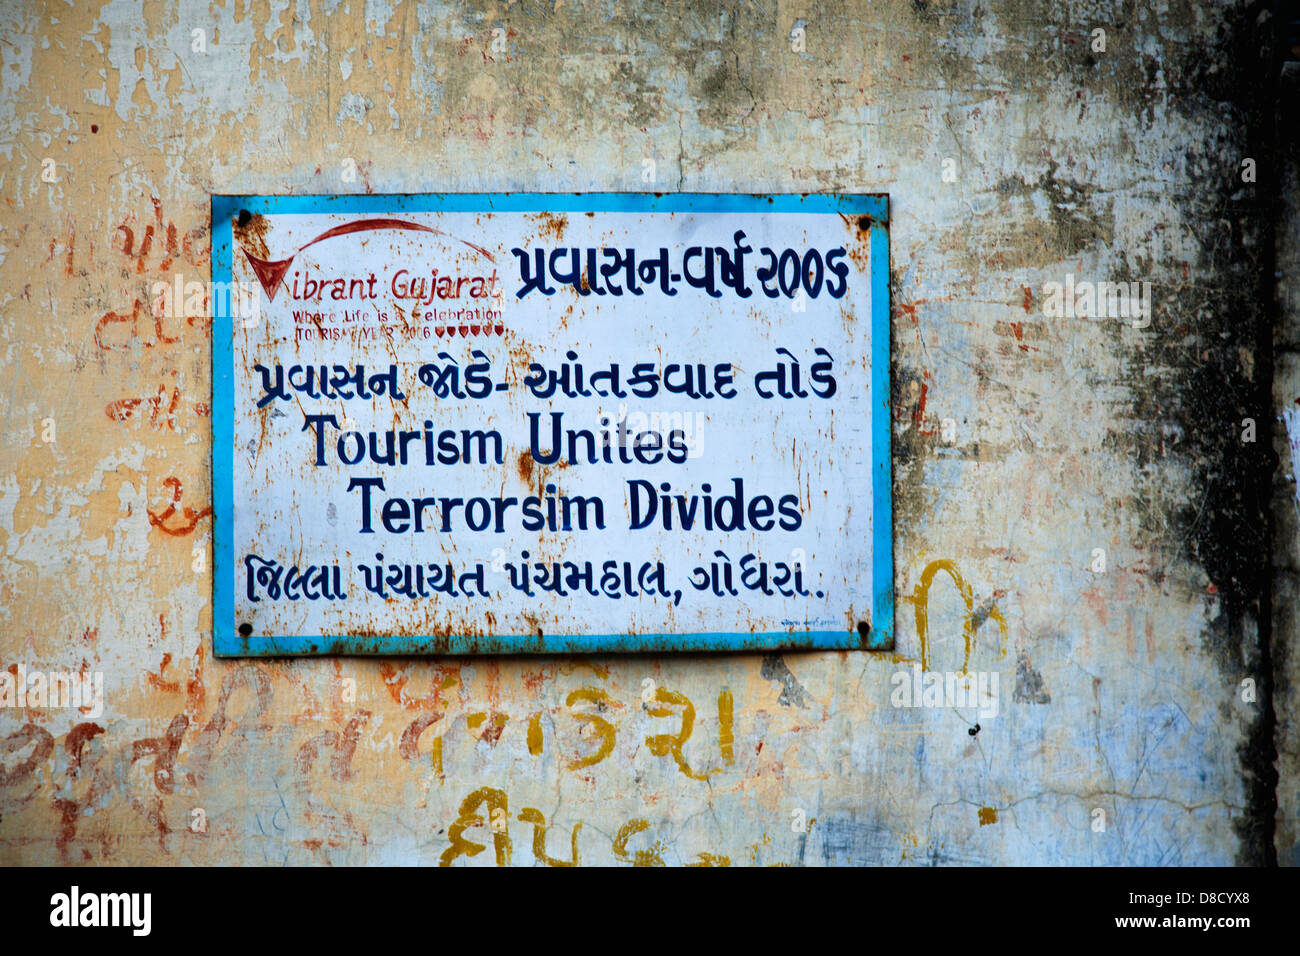 Dilapidated metal sign on a dilapidated plaster wall encouraging tourism in Gujarat, India Stock Photo